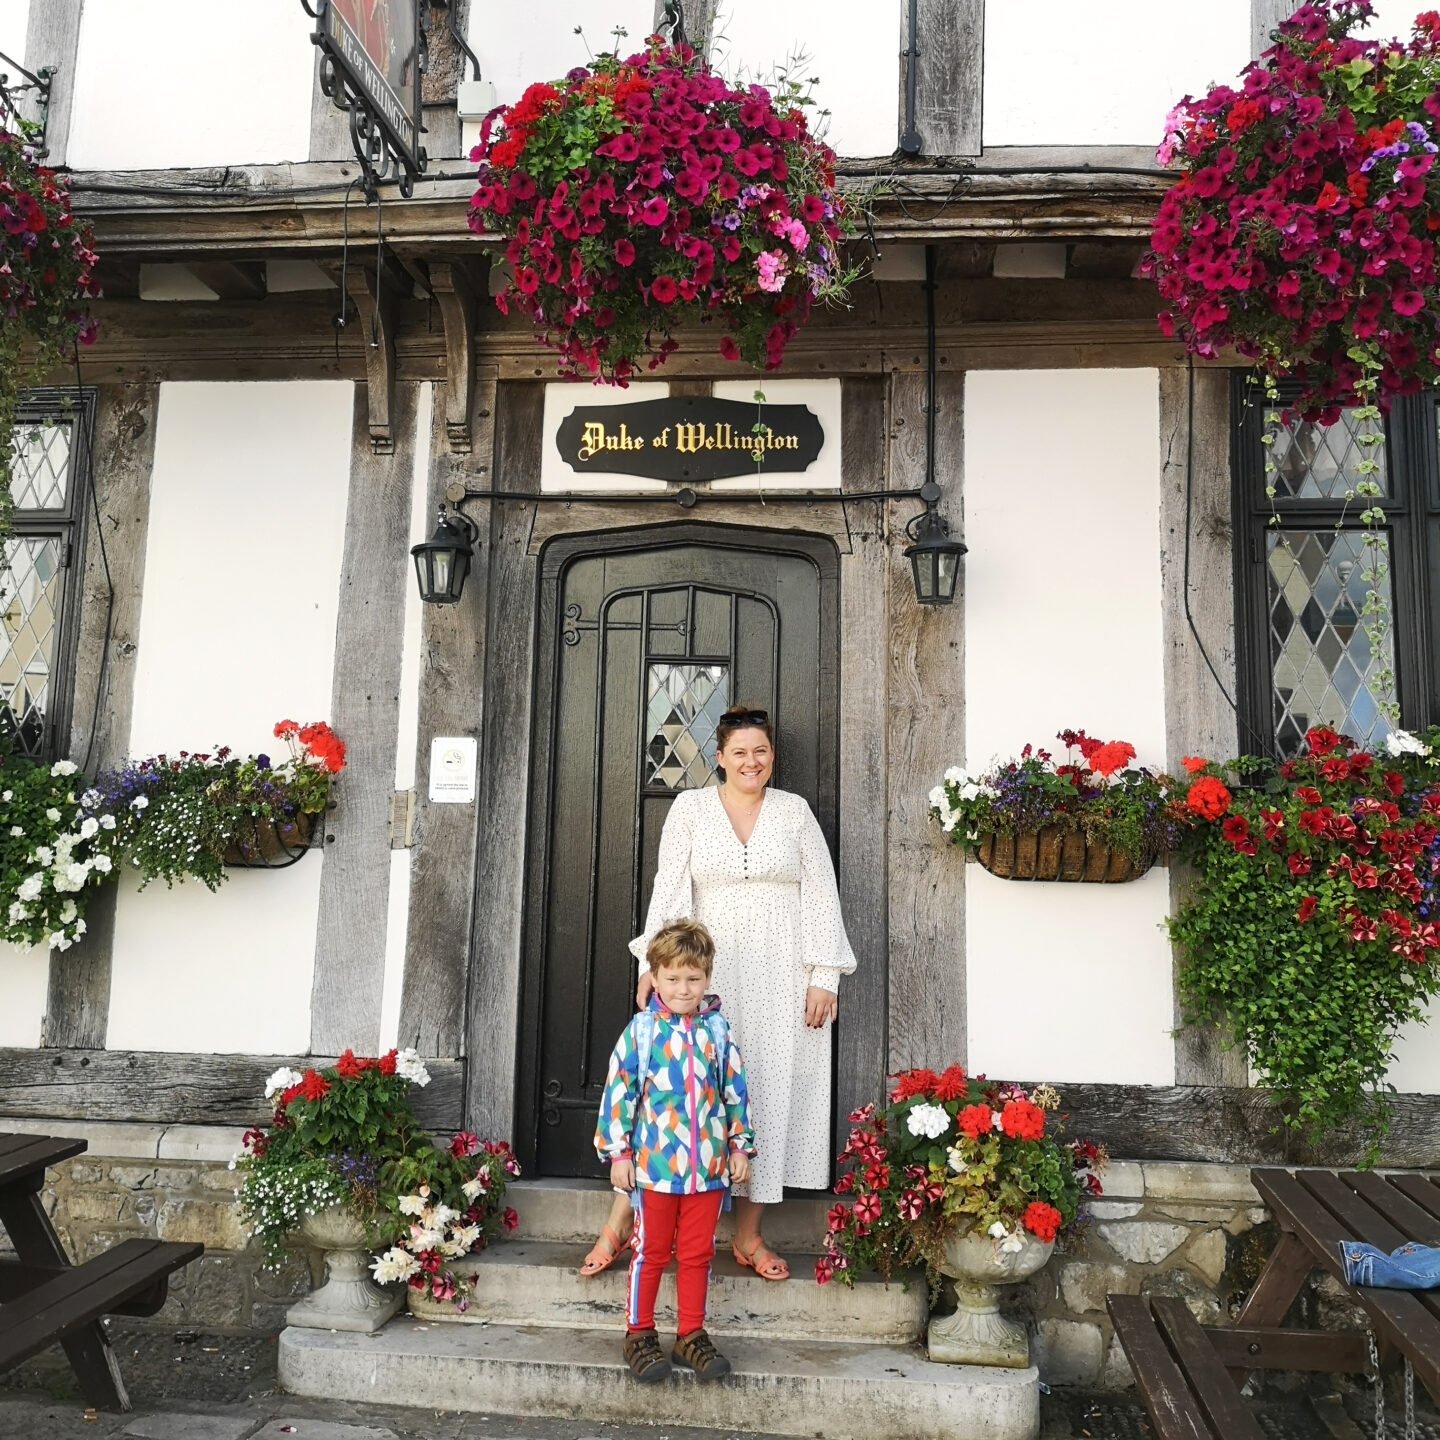 Visit Southampton, #oursouthampton, #visitsouthampton, Southampton, Hampshire, Family Holiday, Day Out, Mini Break, South Coast, British Holiday, the Frenchie Mummy, City Review, Family Friendly, The Old Town, Tudor House & Garden 